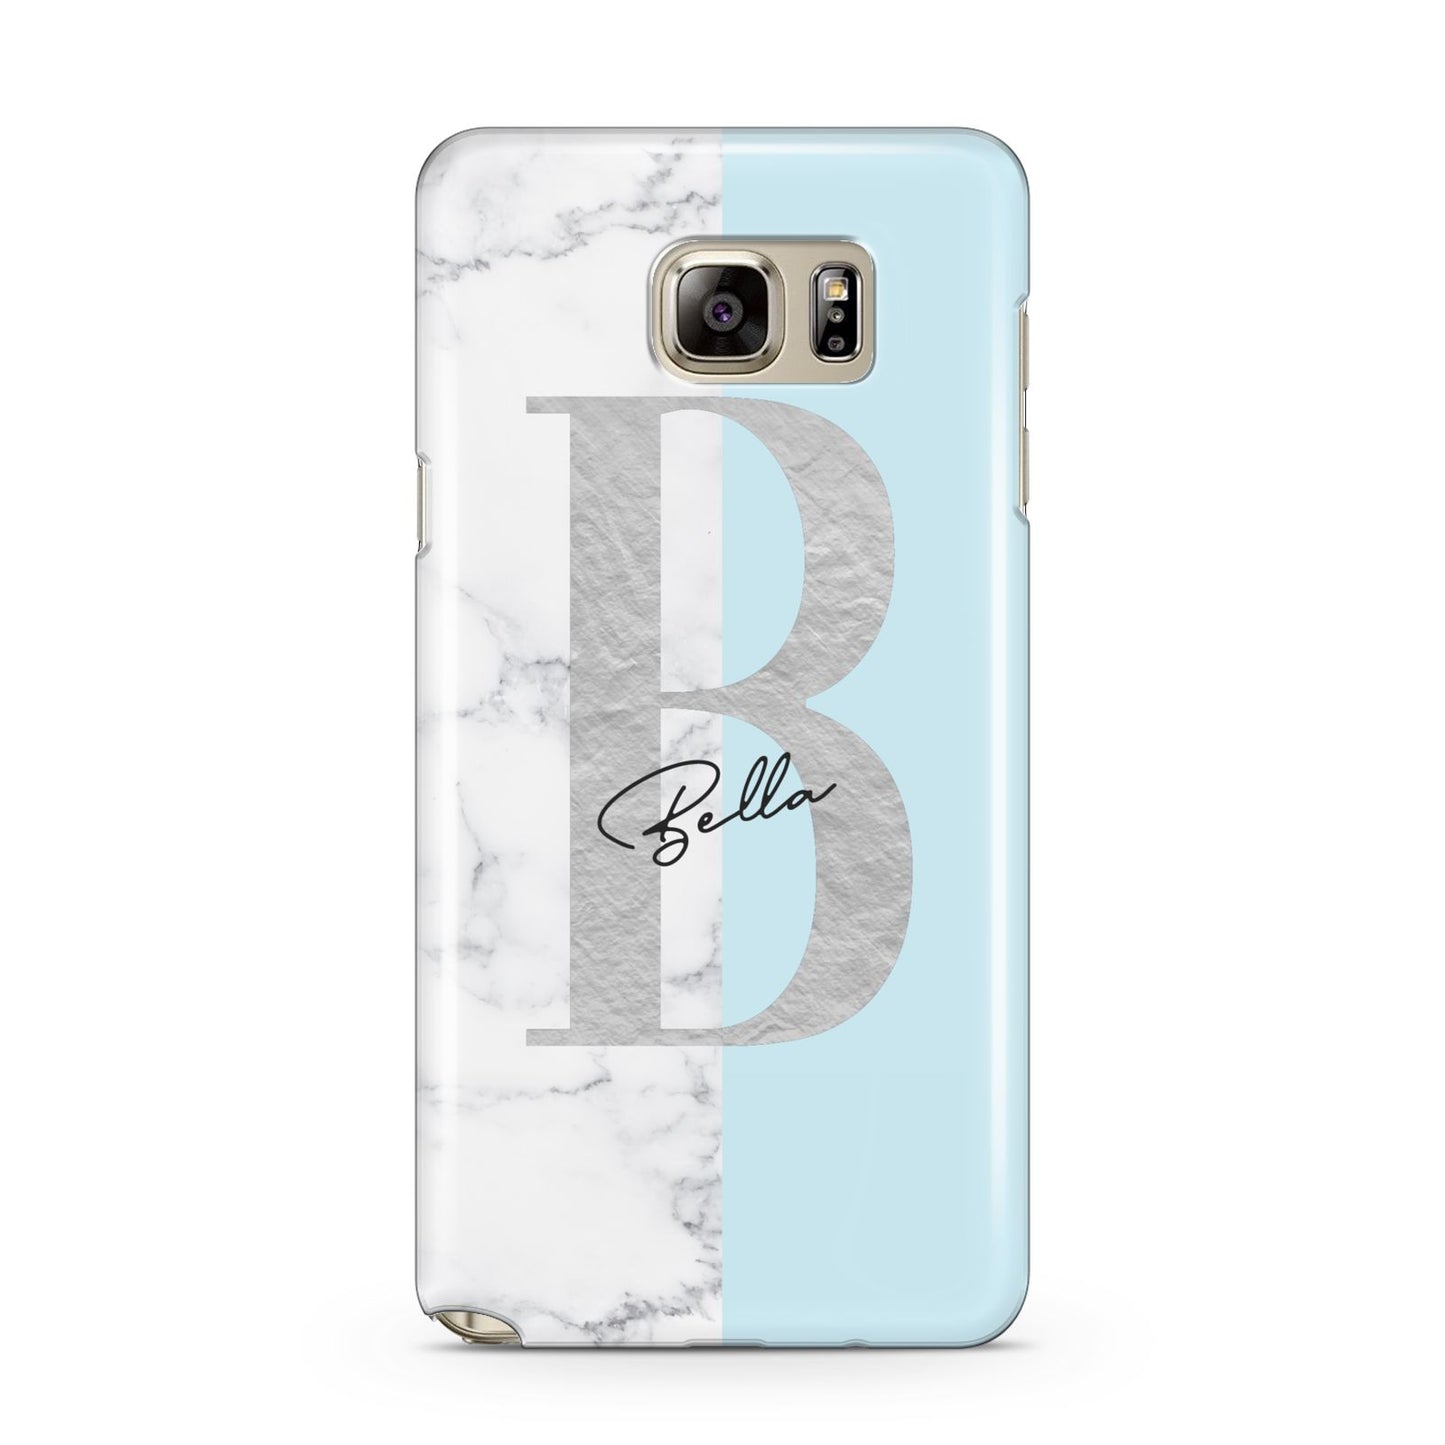 Personalised Chrome Marble Samsung Galaxy Note 5 Case